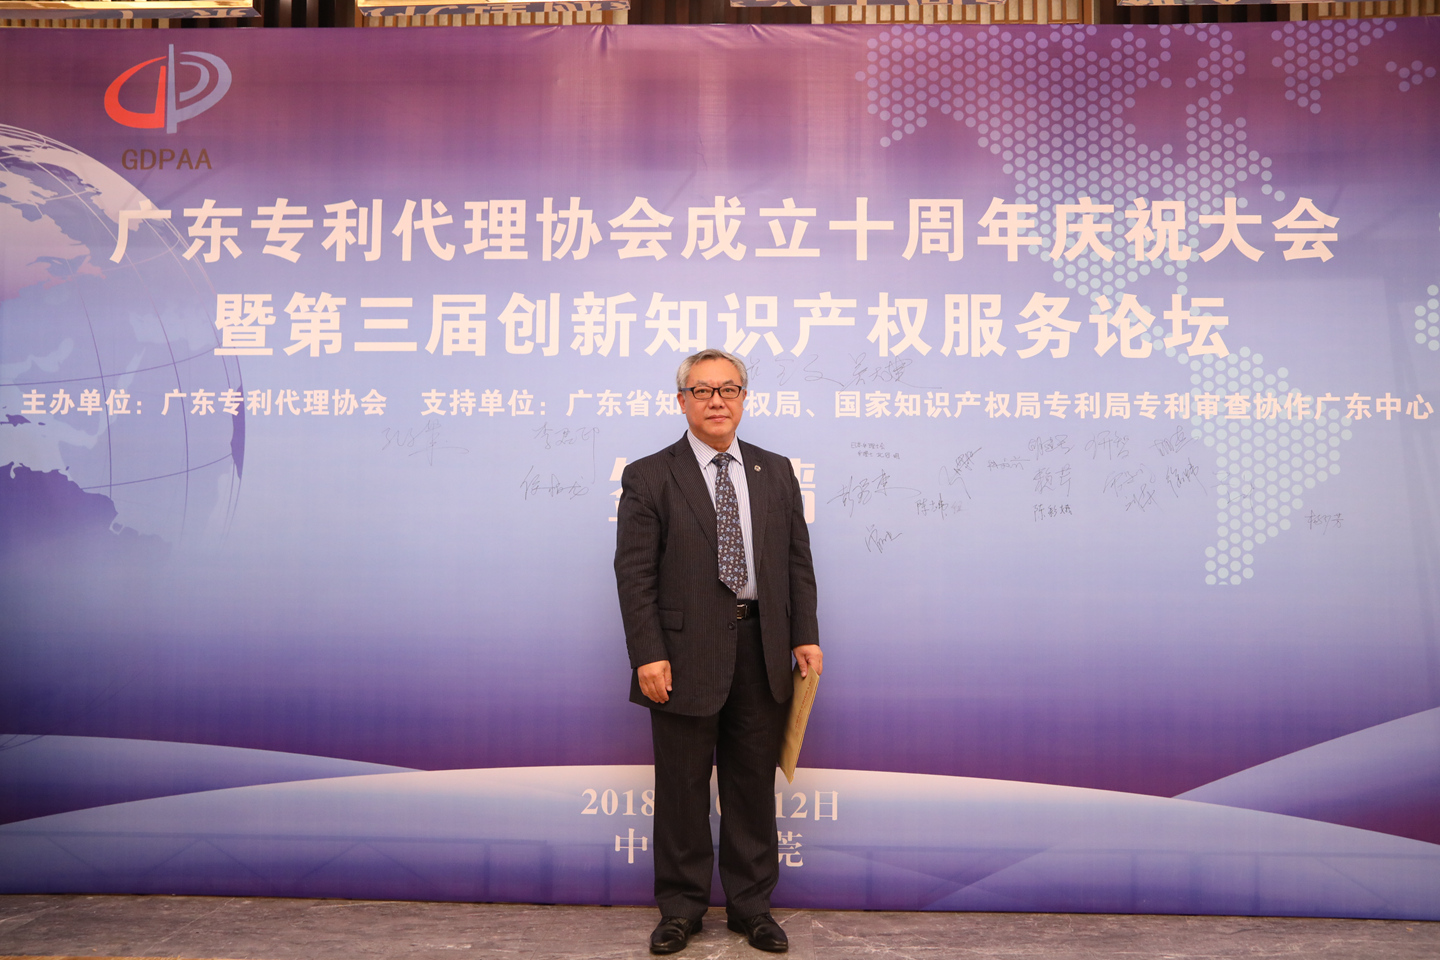 Beijing YUHONG Intellectual Property Law Firm participated in the 10th Anniversary Celebration Conference of Guangdong Patent Agency Association as a sponsor